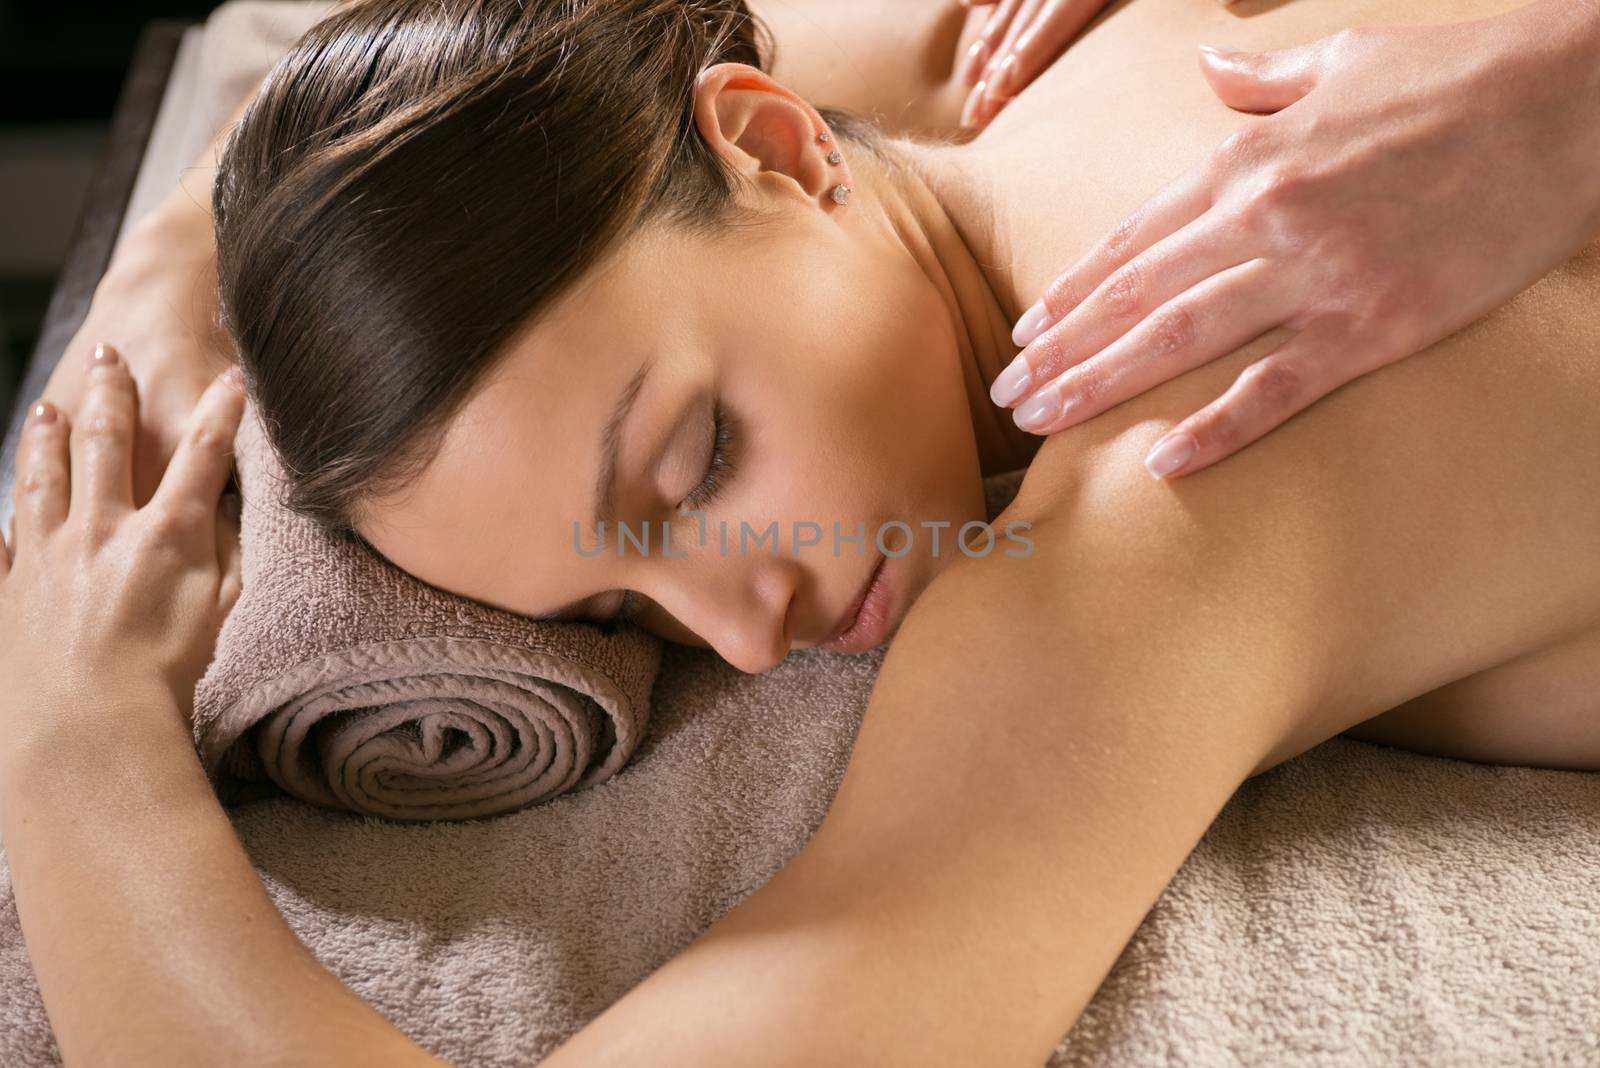 Beautiful woman receiving a relaxing back massage at spa.